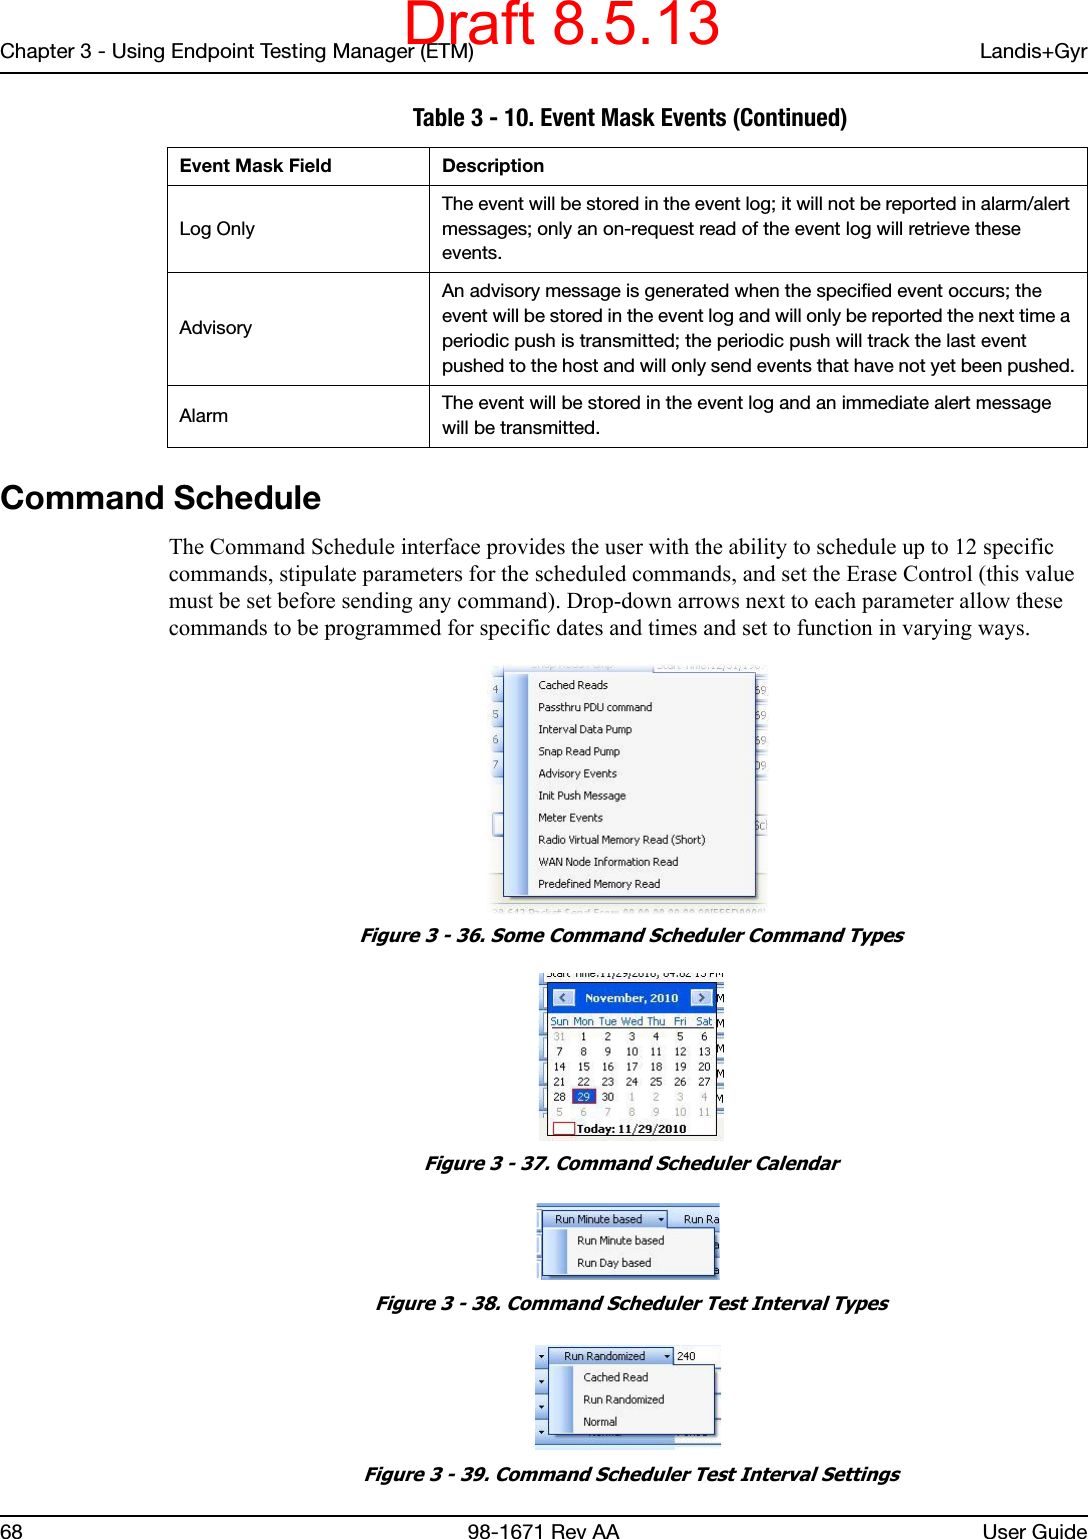 Chapter 3 - Using Endpoint Testing Manager (ETM) Landis+Gyr68 98-1671 Rev AA User GuideCommand ScheduleThe Command Schedule interface provides the user with the ability to schedule up to 12 specific commands, stipulate parameters for the scheduled commands, and set the Erase Control (this value must be set before sending any command). Drop-down arrows next to each parameter allow these commands to be programmed for specific dates and times and set to function in varying ways. Figure 3 - 36. Some Command Scheduler Command Types Figure 3 - 37. Command Scheduler Calendar Figure 3 - 38. Command Scheduler Test Interval Types Figure 3 - 39. Command Scheduler Test Interval SettingsLog OnlyThe event will be stored in the event log; it will not be reported in alarm/alert messages; only an on-request read of the event log will retrieve these events.Advisory An advisory message is generated when the specified event occurs; the event will be stored in the event log and will only be reported the next time a periodic push is transmitted; the periodic push will track the last event pushed to the host and will only send events that have not yet been pushed.Alarm The event will be stored in the event log and an immediate alert message will be transmitted. Table 3 - 10. Event Mask Events (Continued)Event Mask Field DescriptionDraft 8.5.13